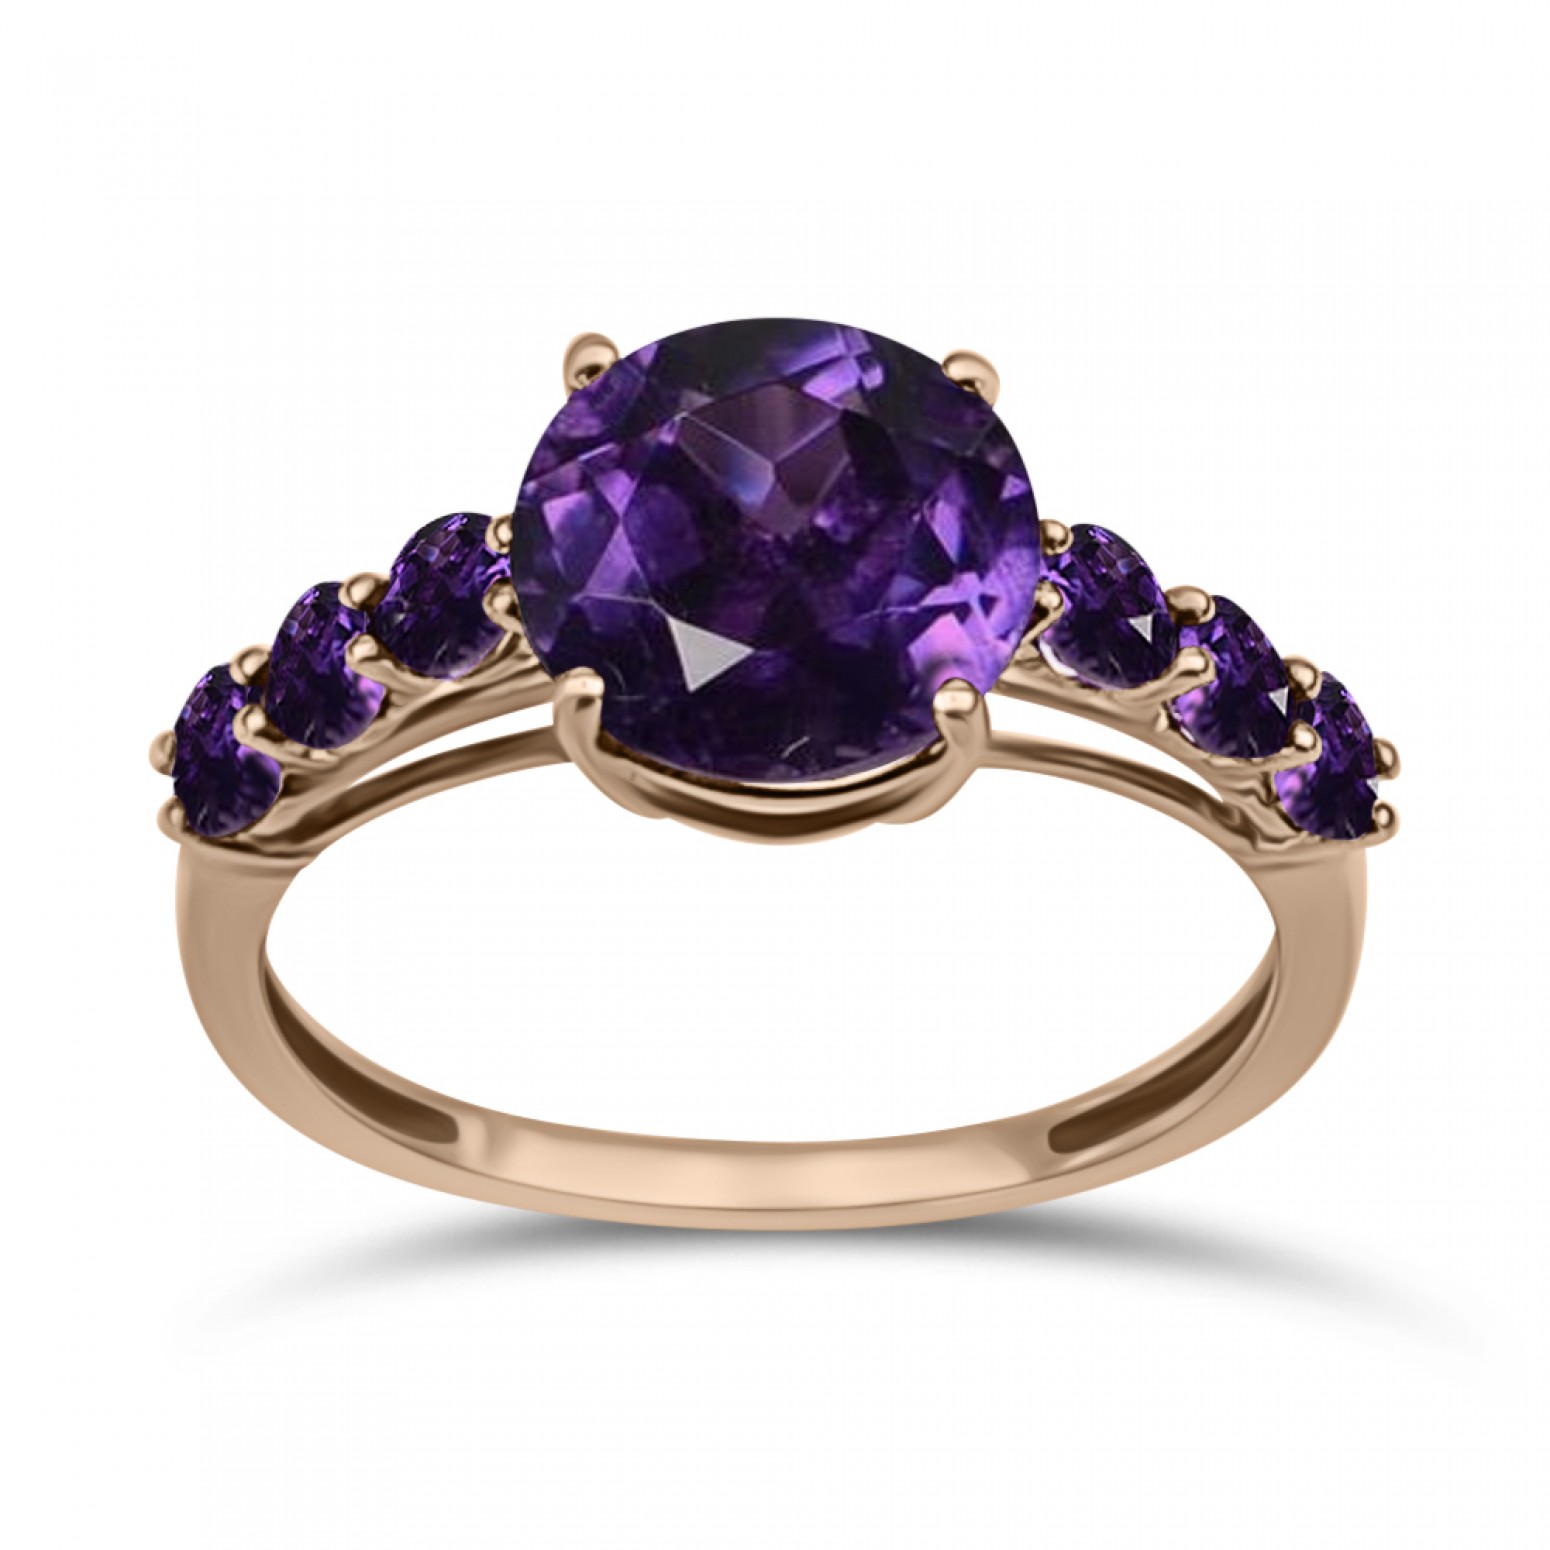 Solitaire ring 18K pink gold with Amethyst 3.40ct, da3847 RINGS Κοσμηματα - chrilia.gr